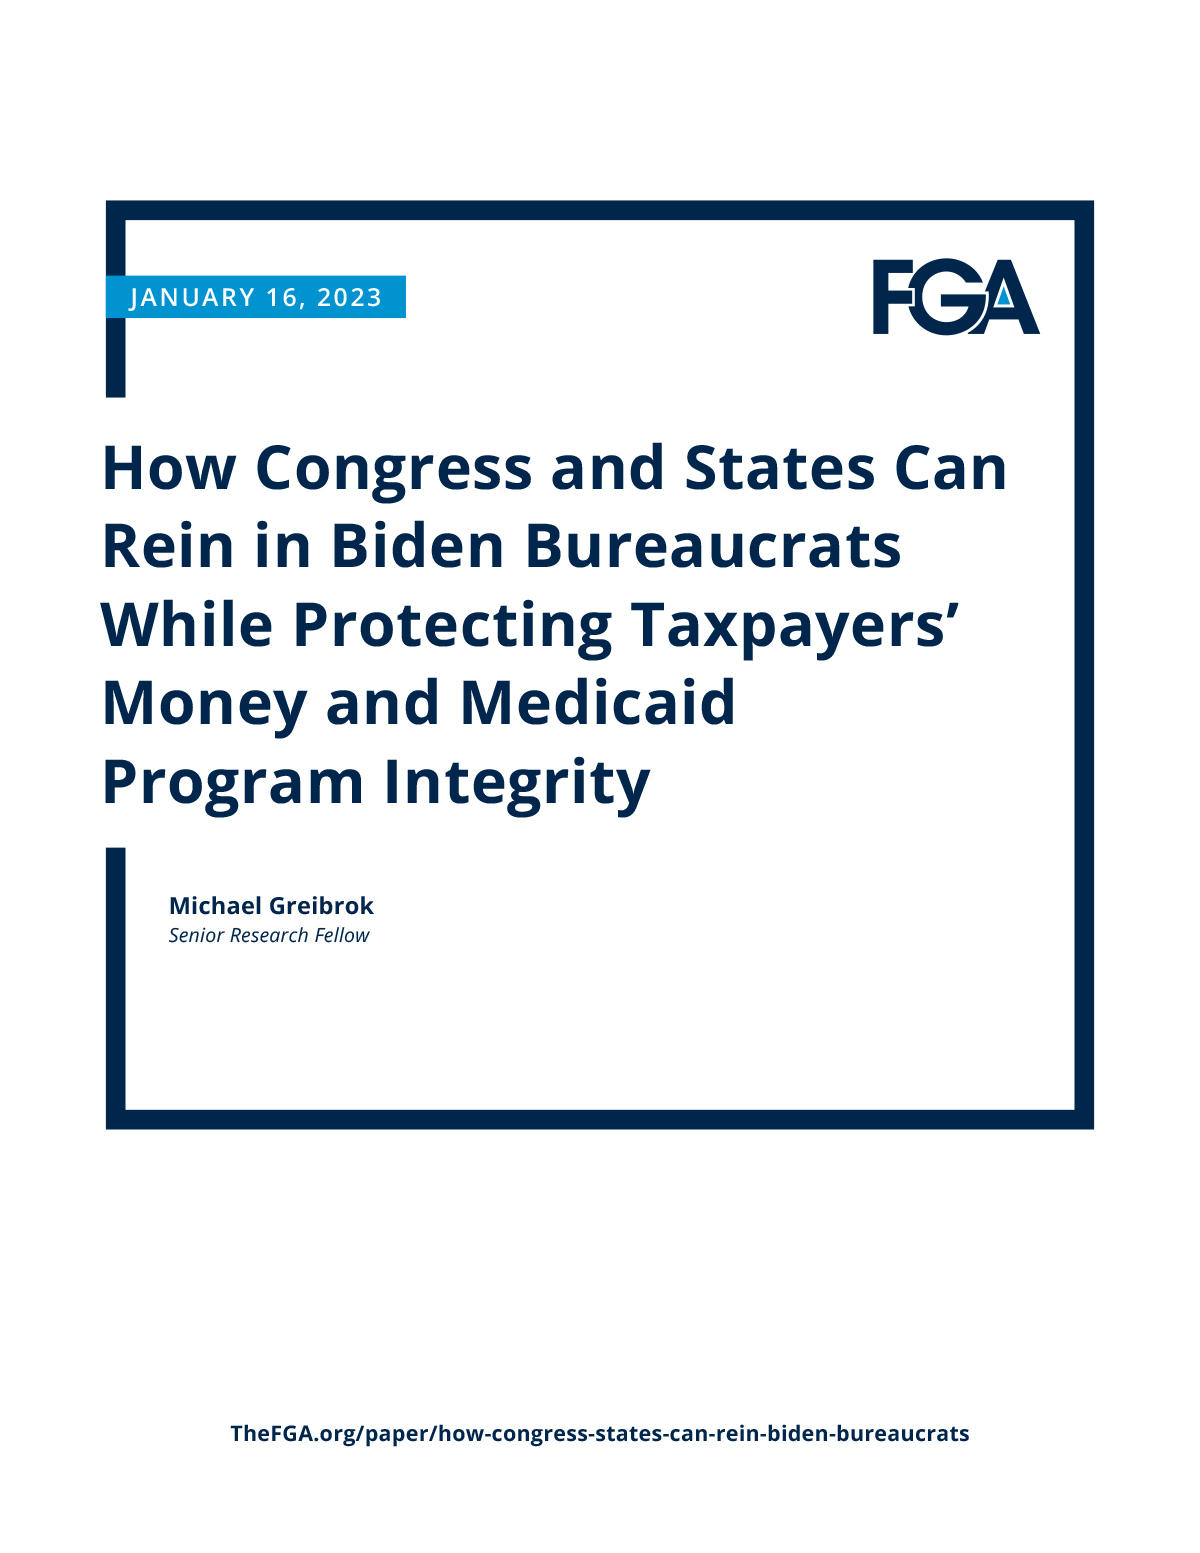 How Congress and States Can Rein in Biden Bureaucrats While Protecting Taxpayers’ Money and Medicaid Program Integrity